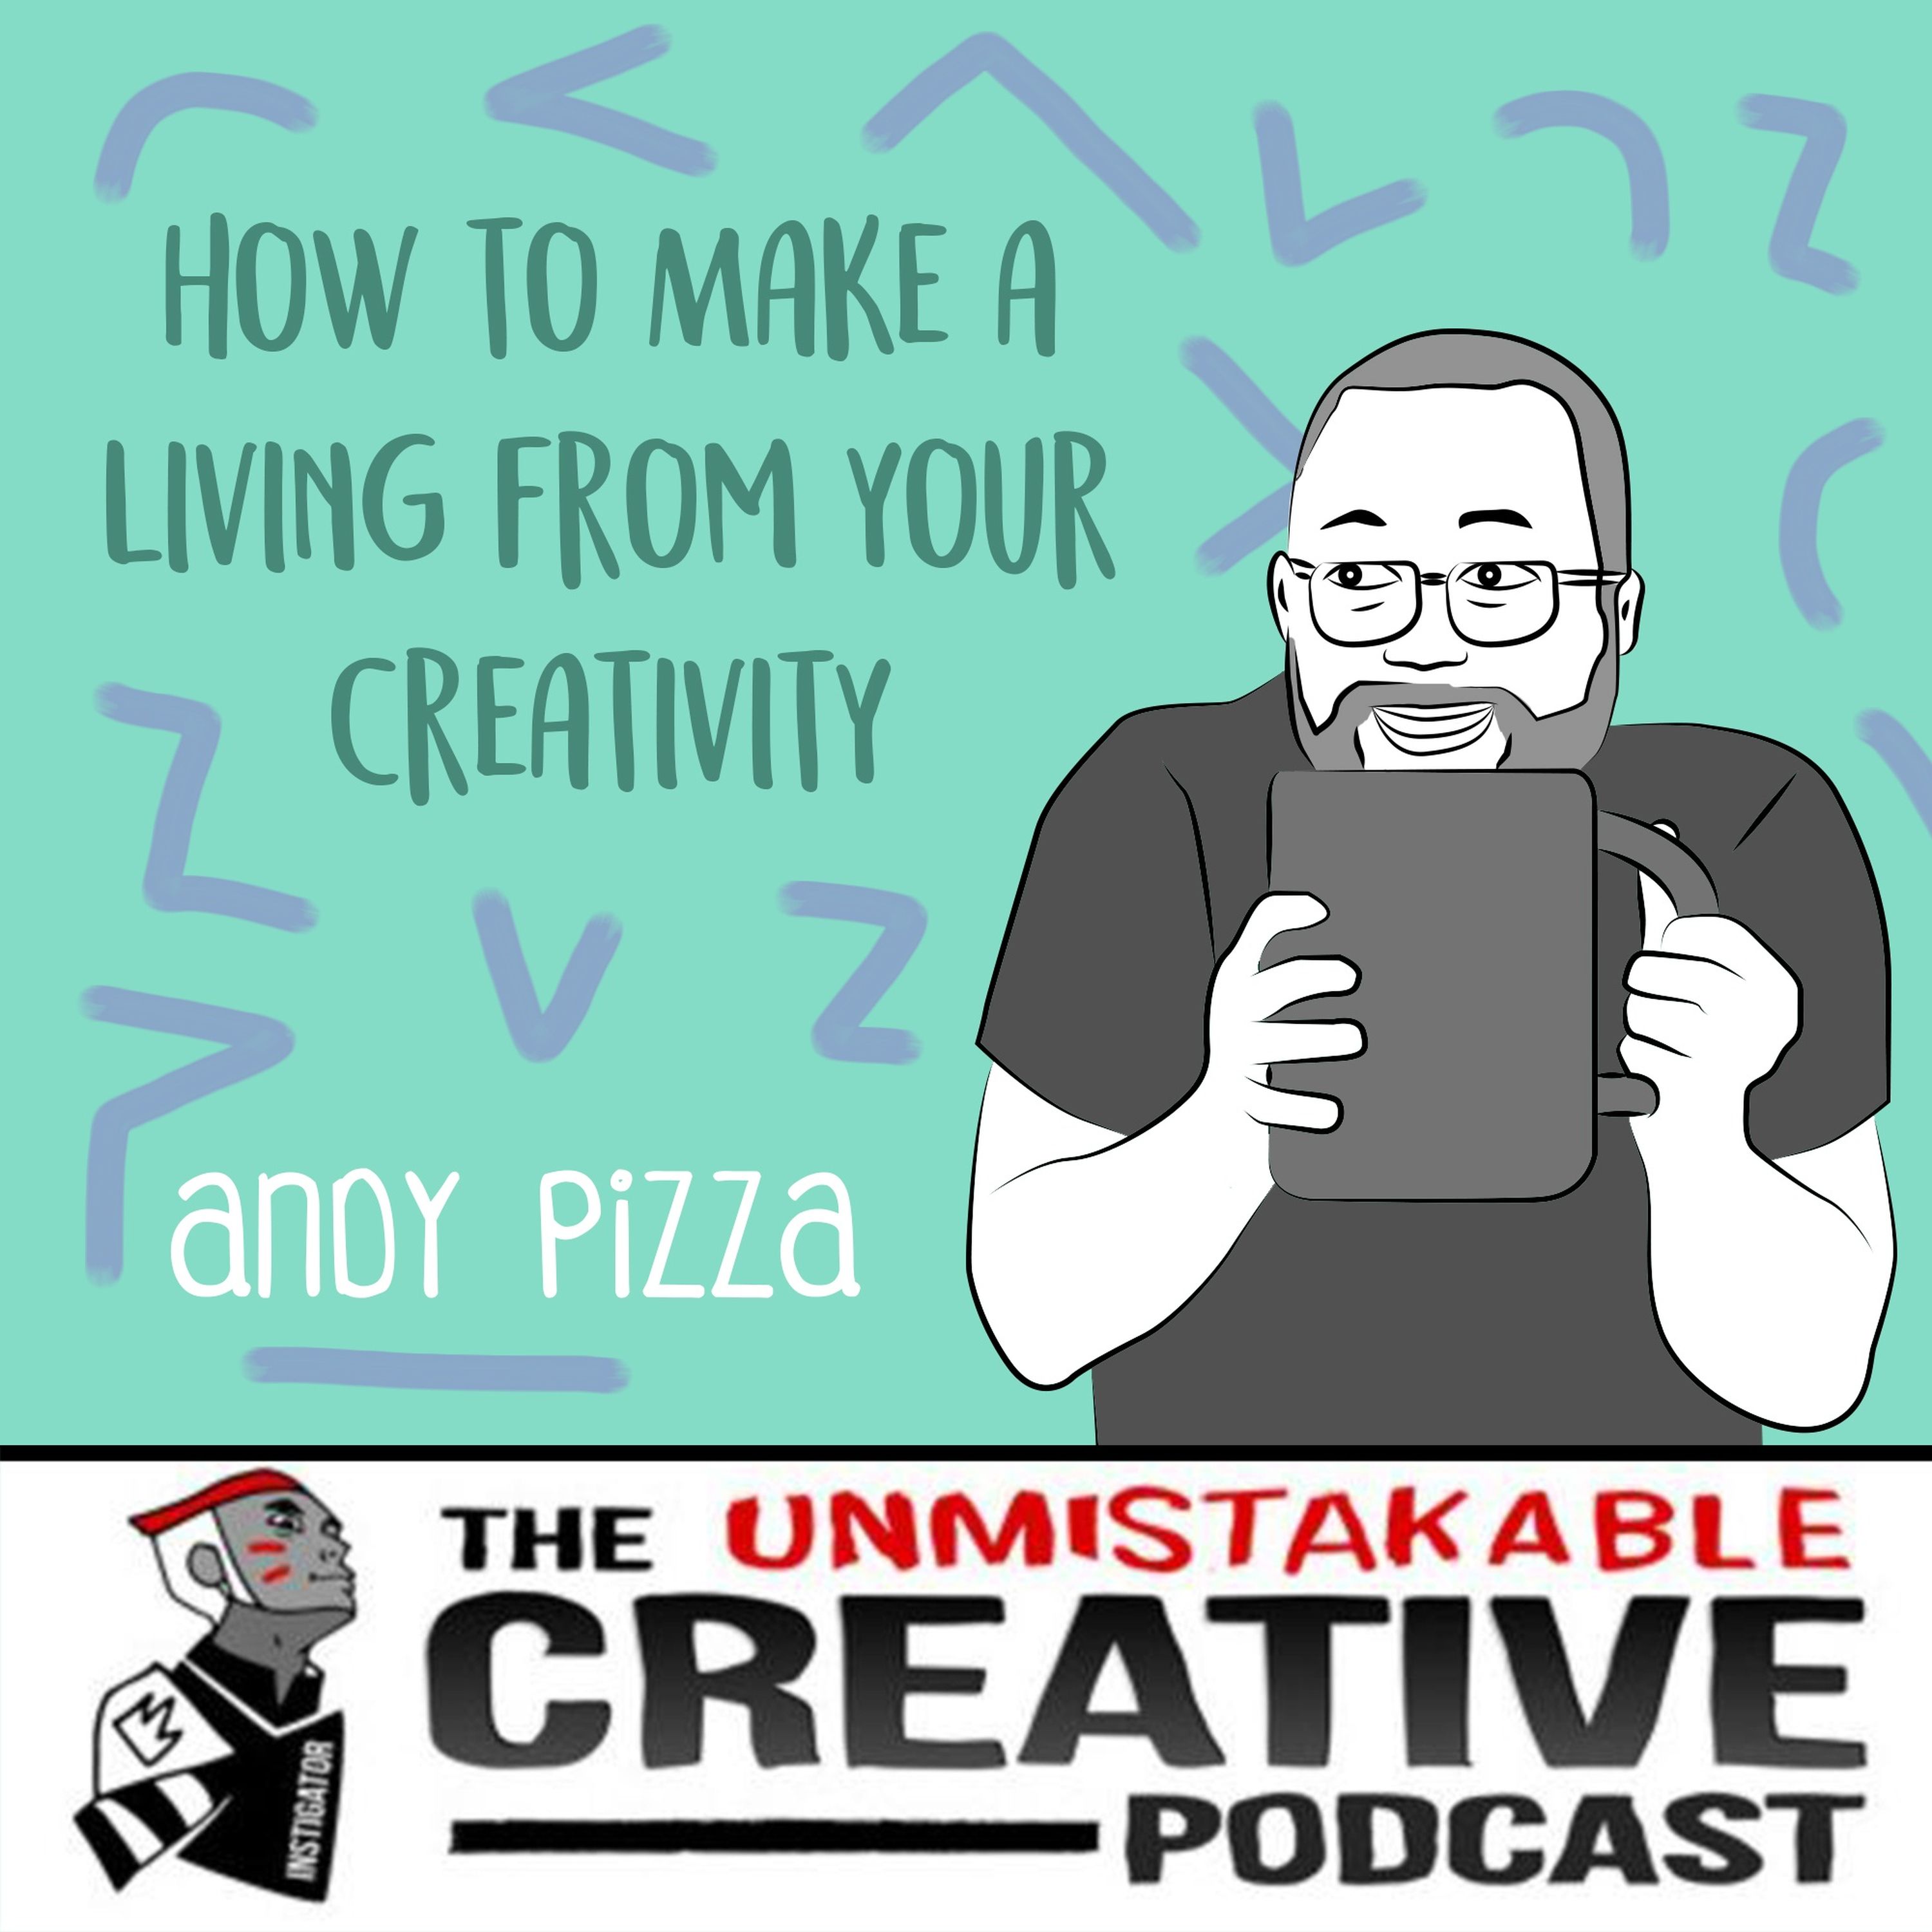 Andy Pizza: How to Make a Living from Your Creativity